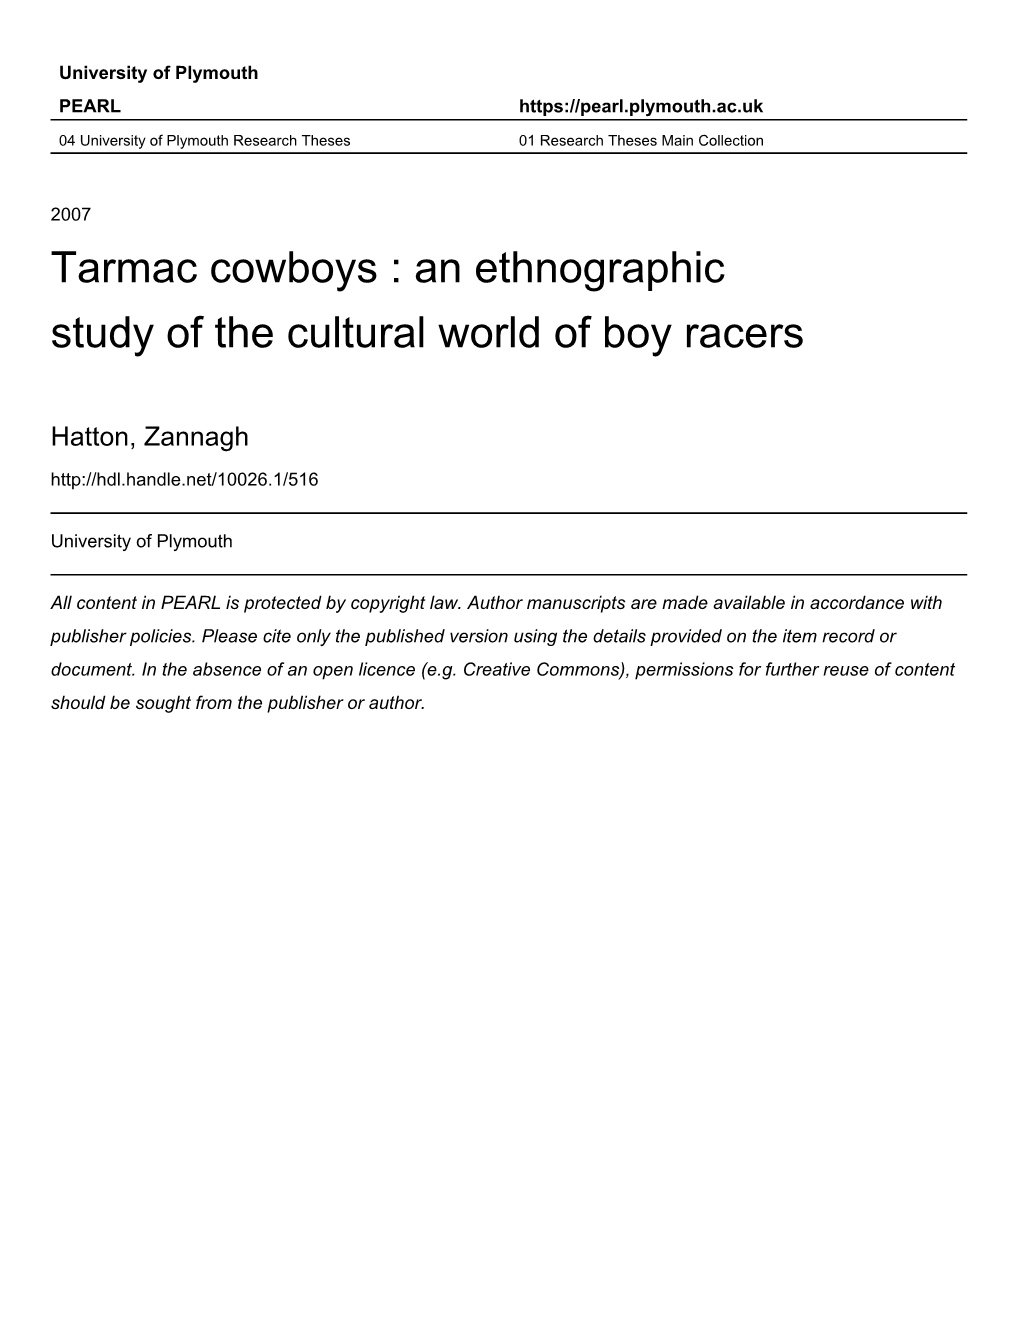 Tarmac Cowboys: an Ethnographic Study of the Cultural World of Boy Racers